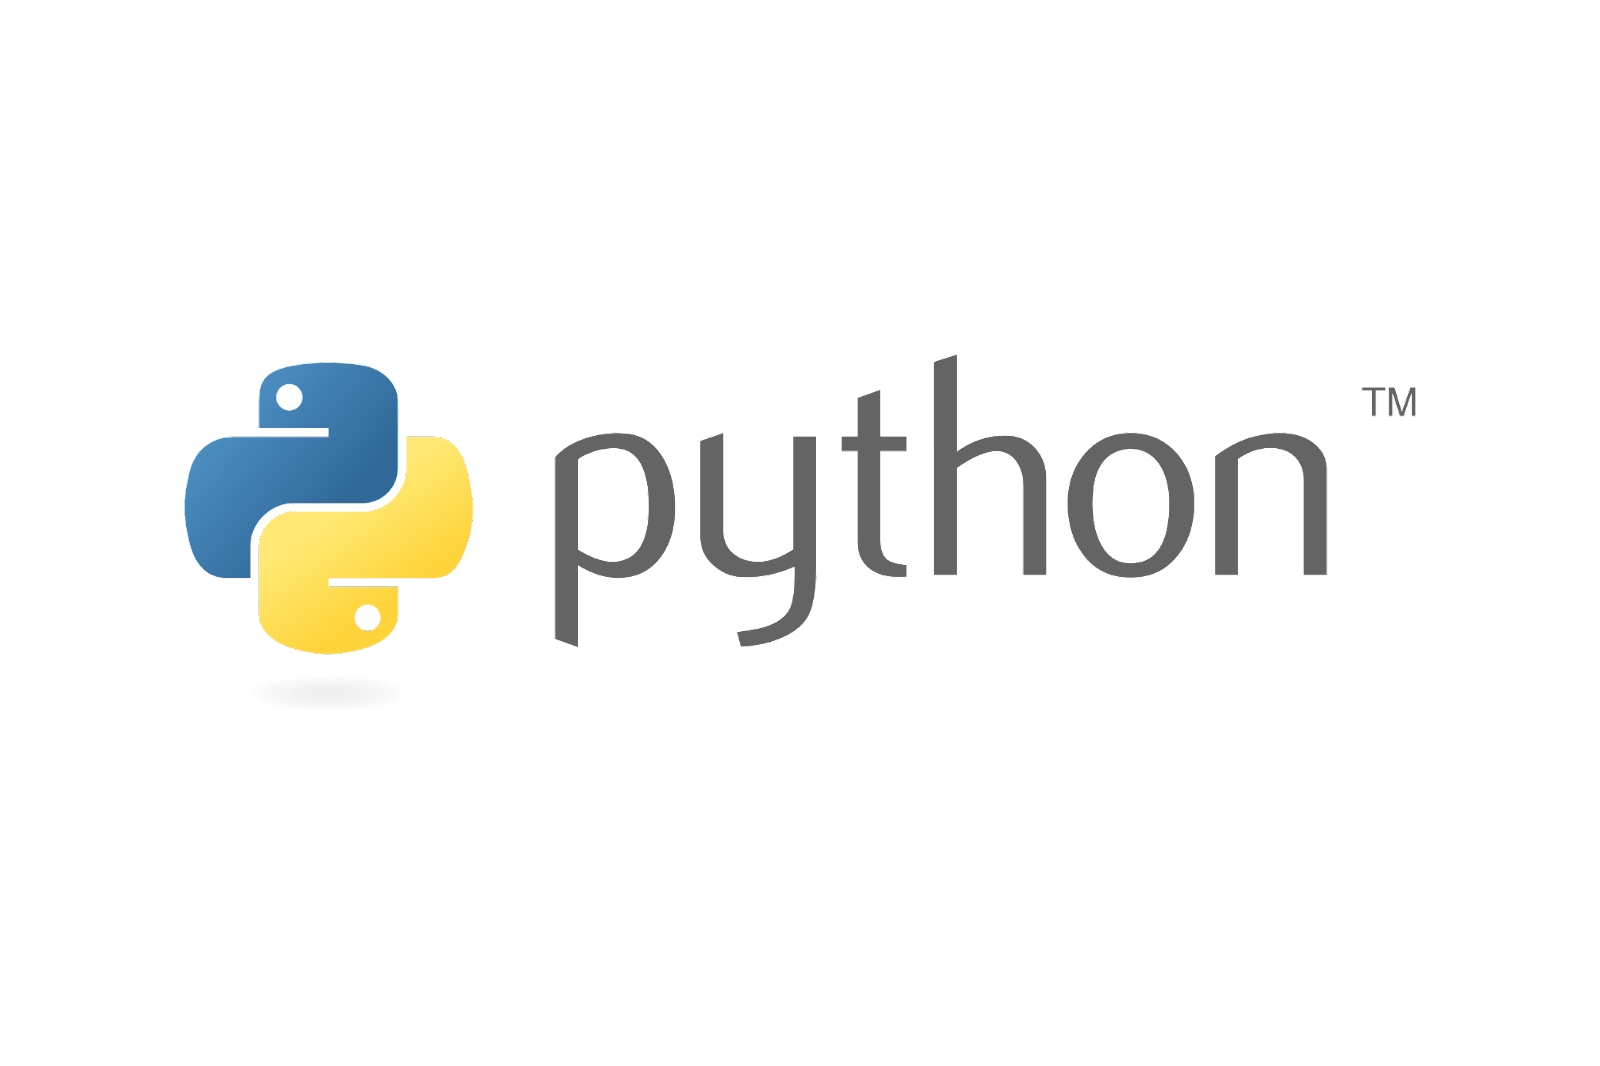 python in grey letters with white background